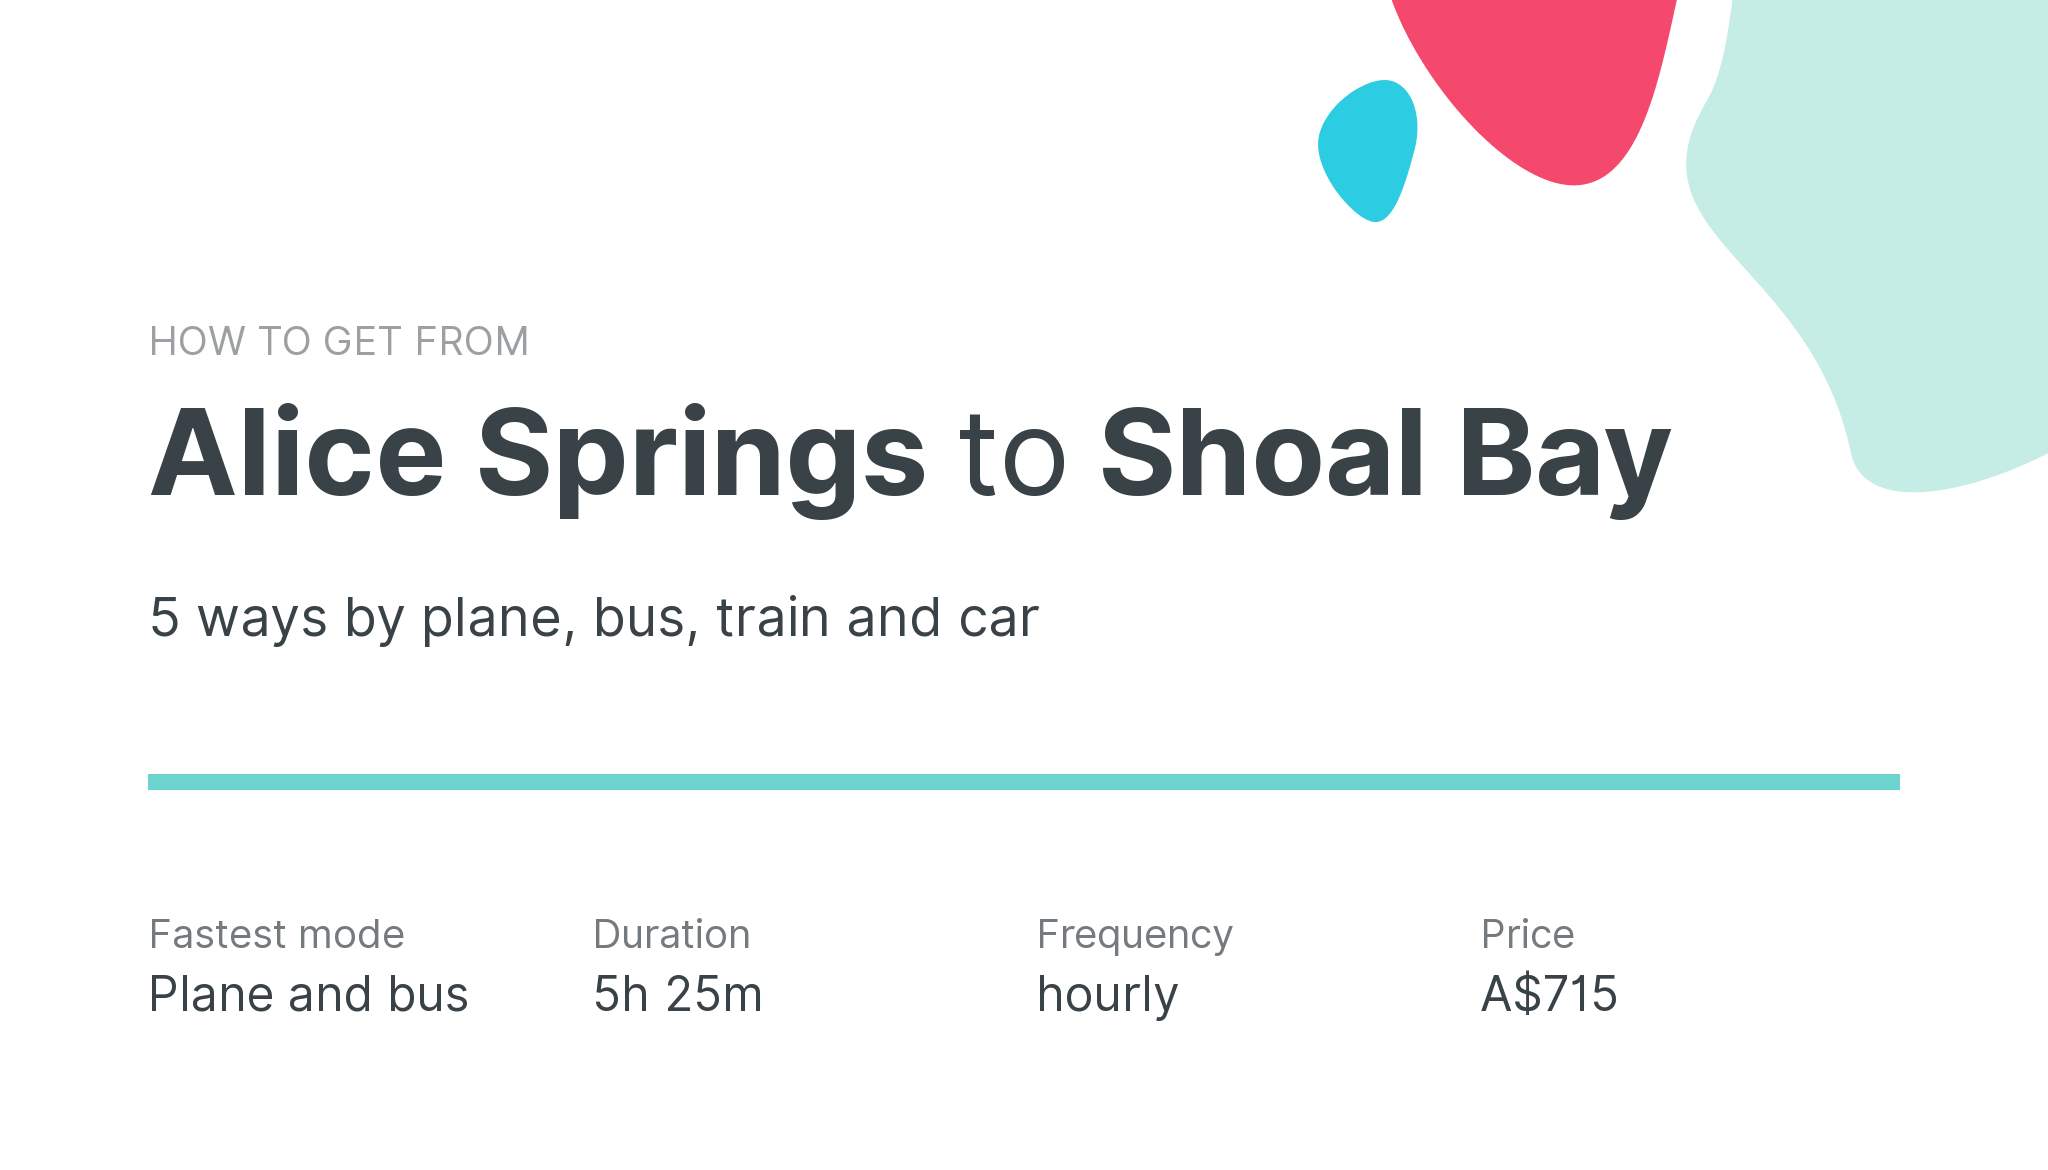 How do I get from Alice Springs to Shoal Bay